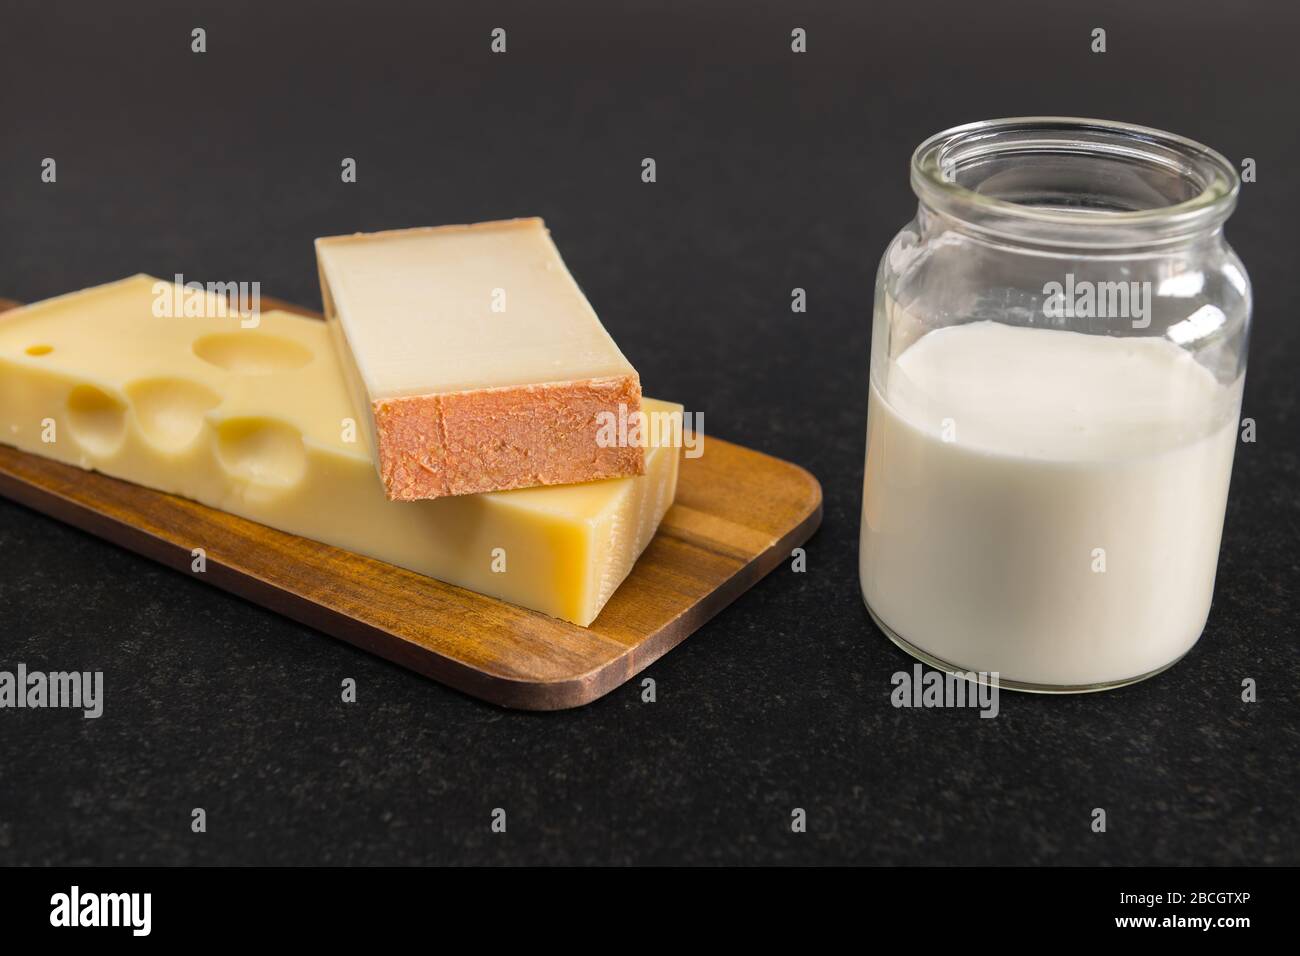 Emmental cheese and Gruyere cheese on a wooden board stand next to a glass filled with milk on a black table. Stock Photo